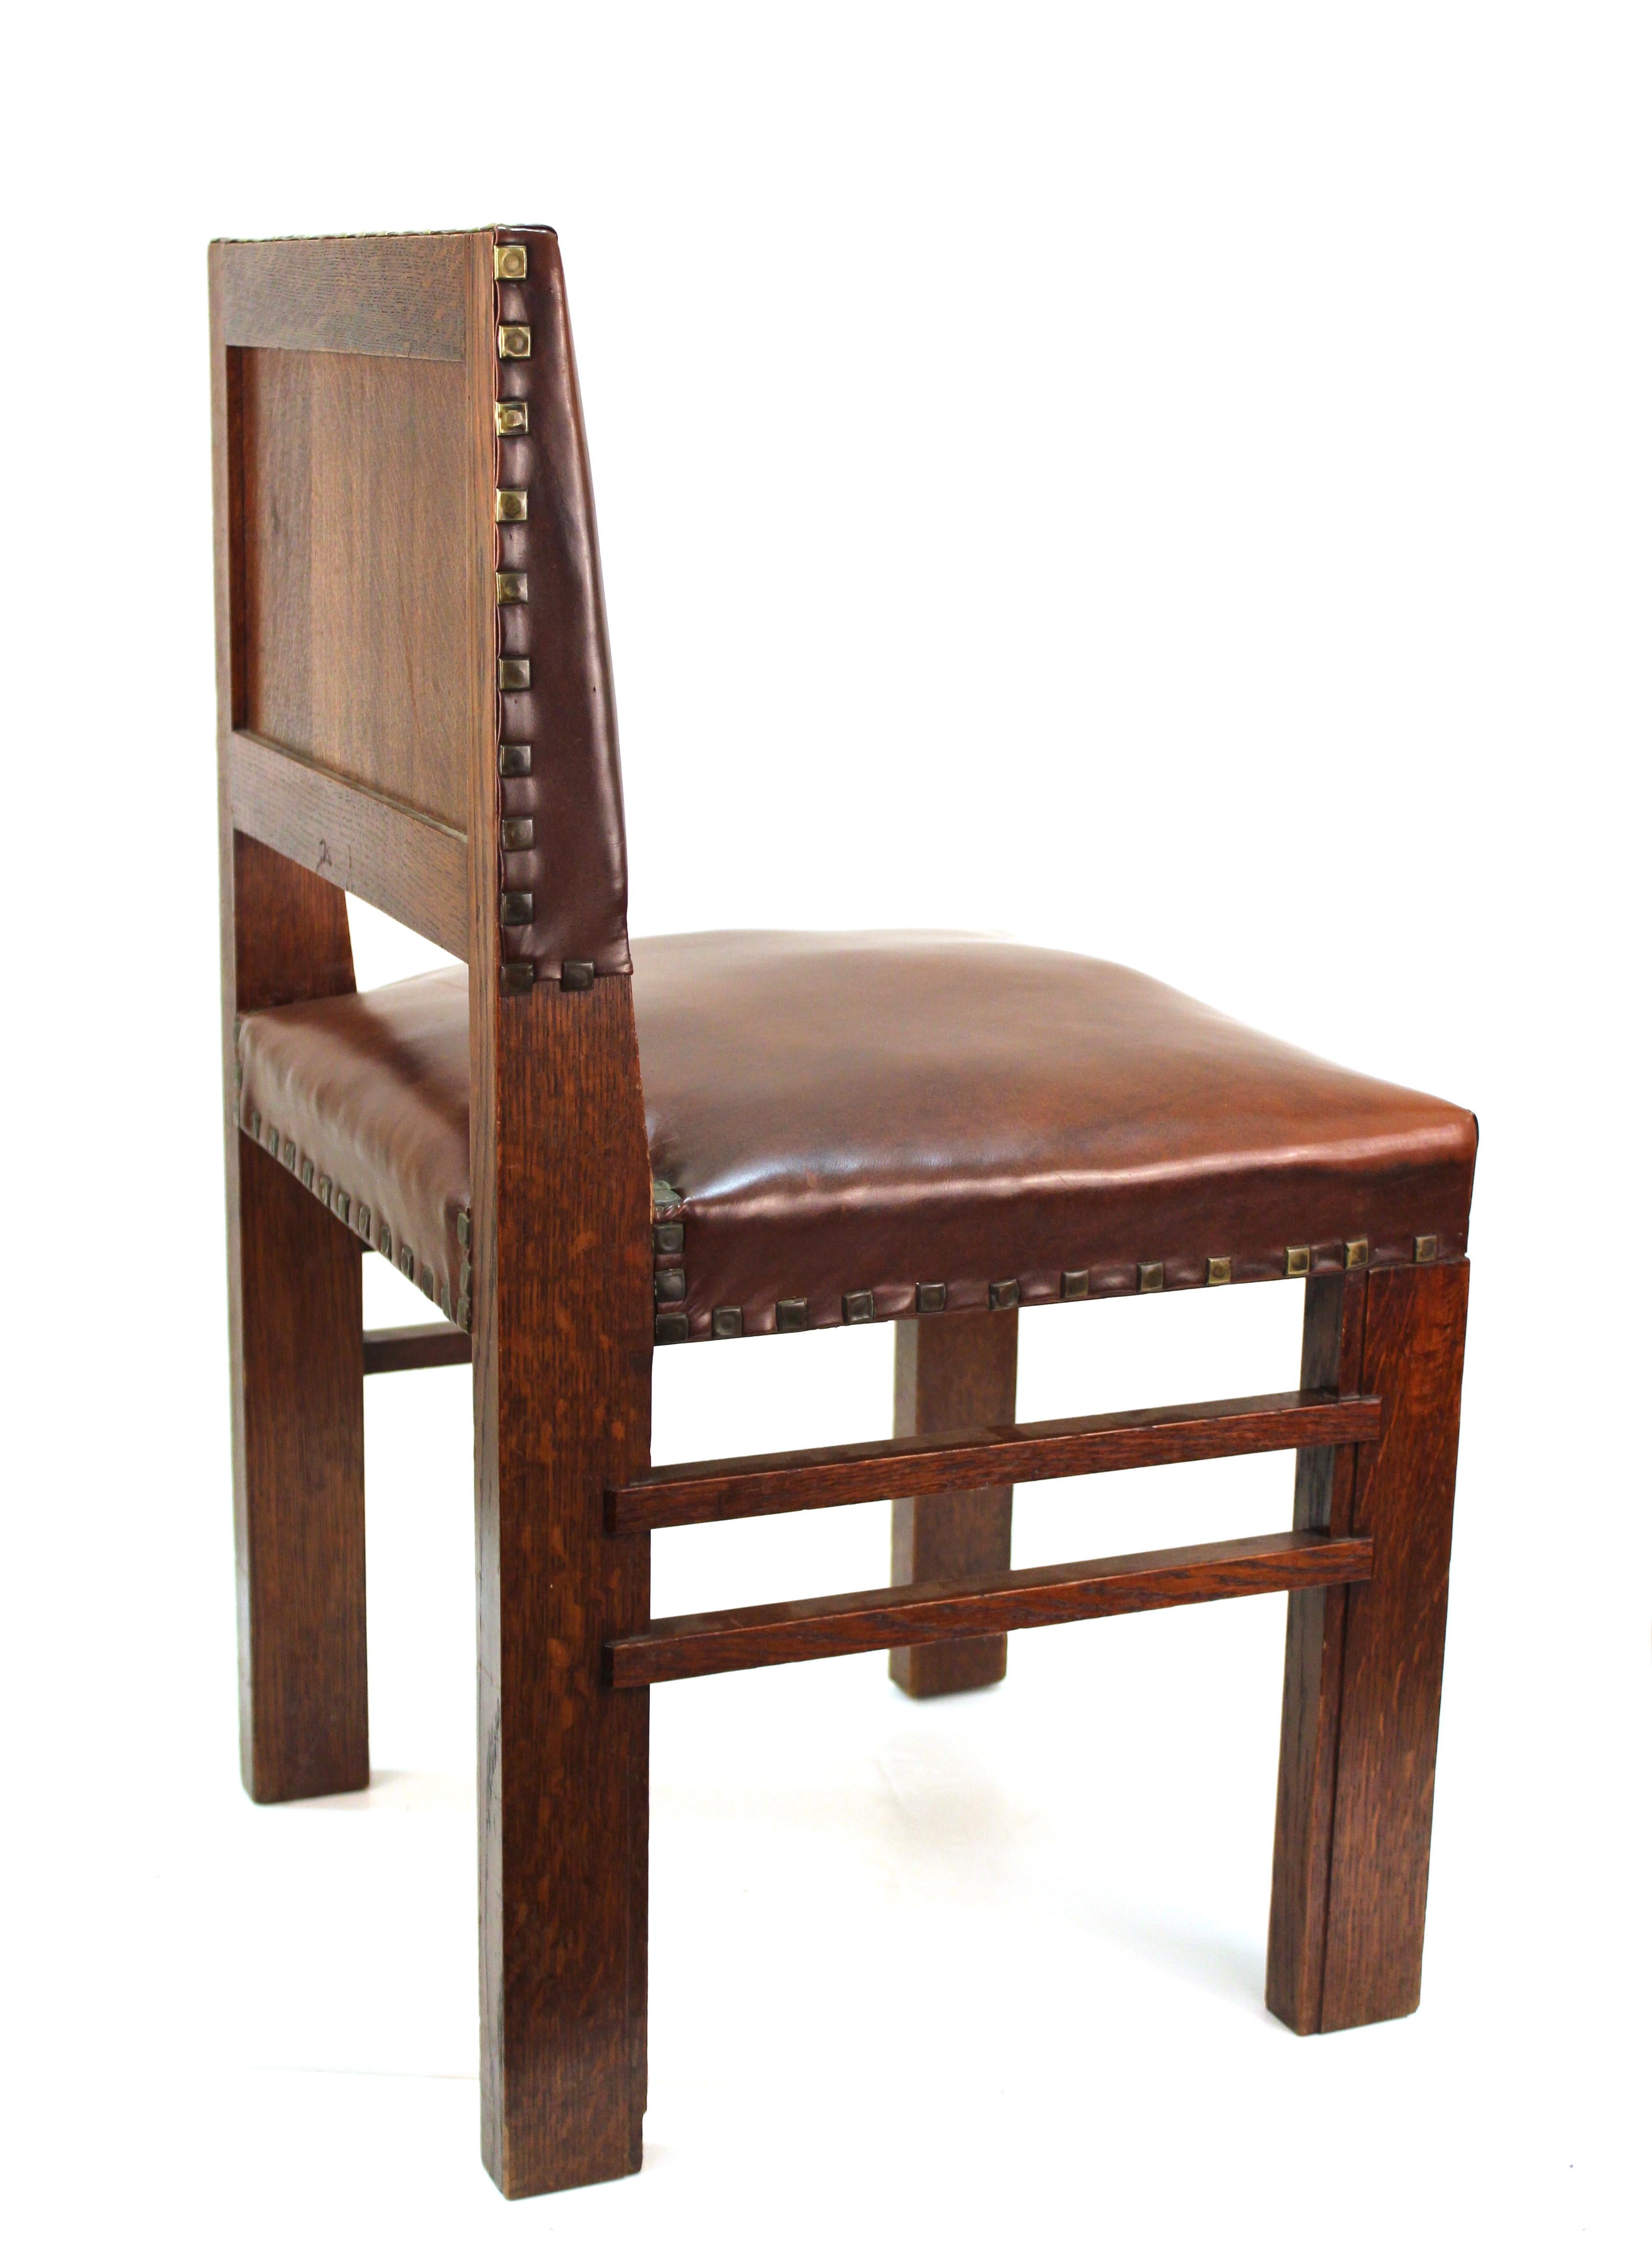 American Chairs in Oak with Cognac Colored Leatherette Seats 2